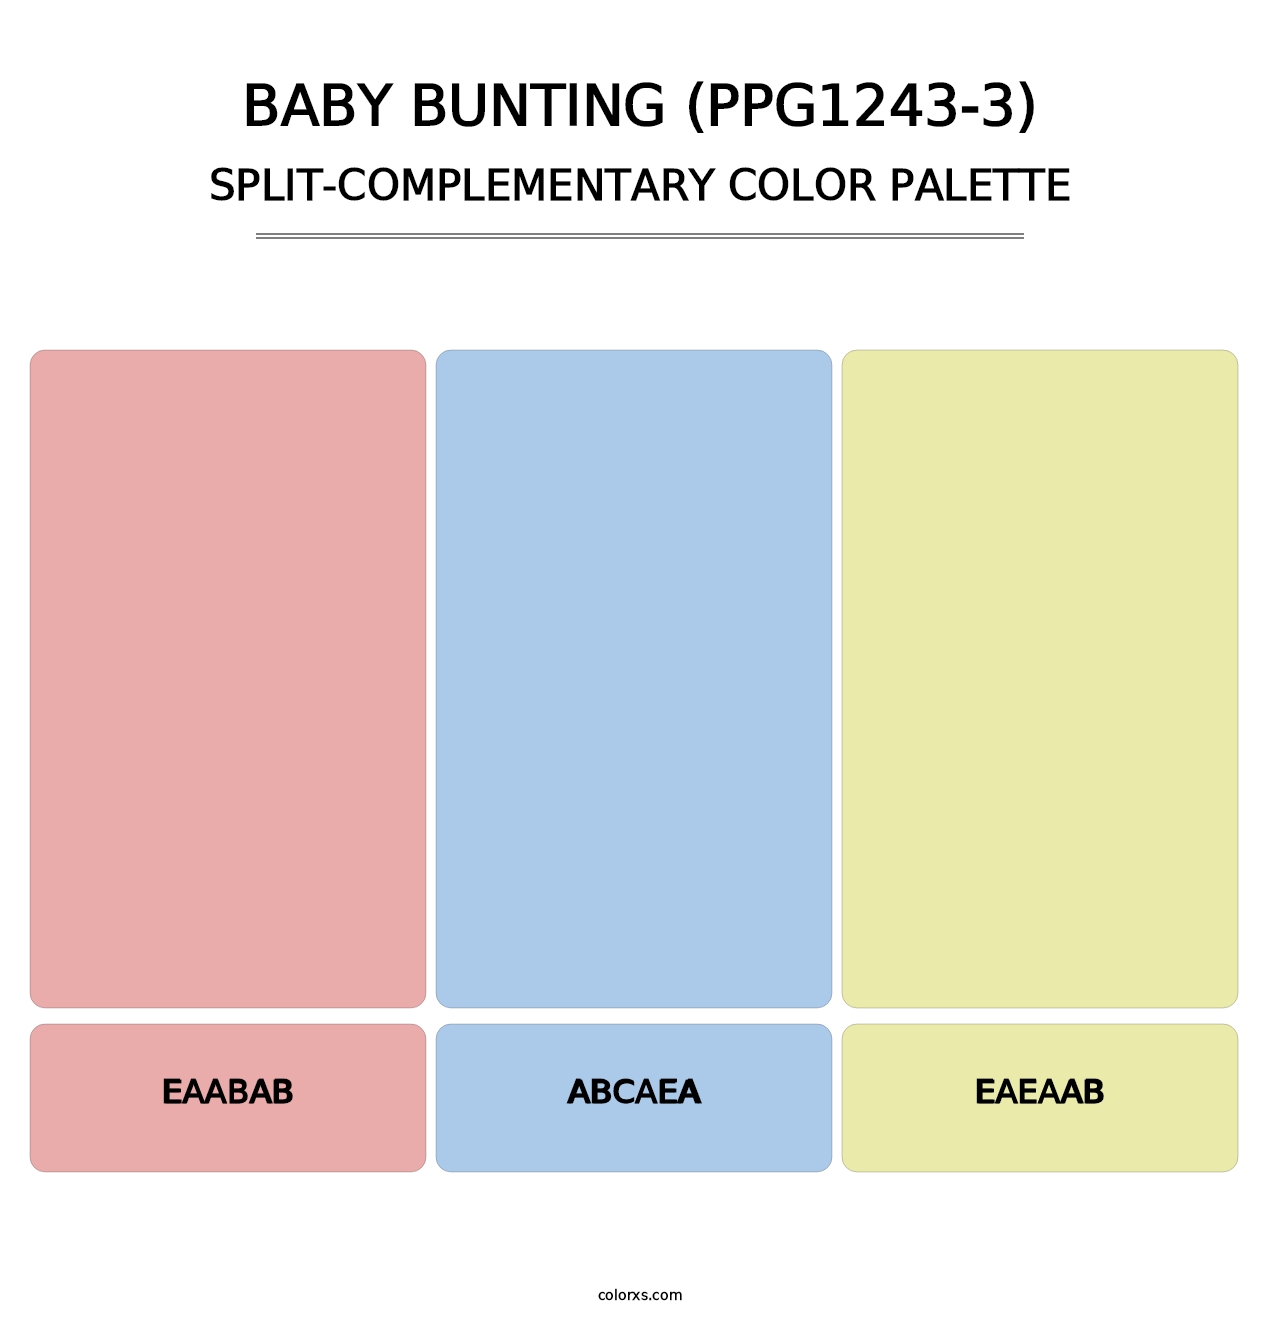 Baby Bunting (PPG1243-3) - Split-Complementary Color Palette